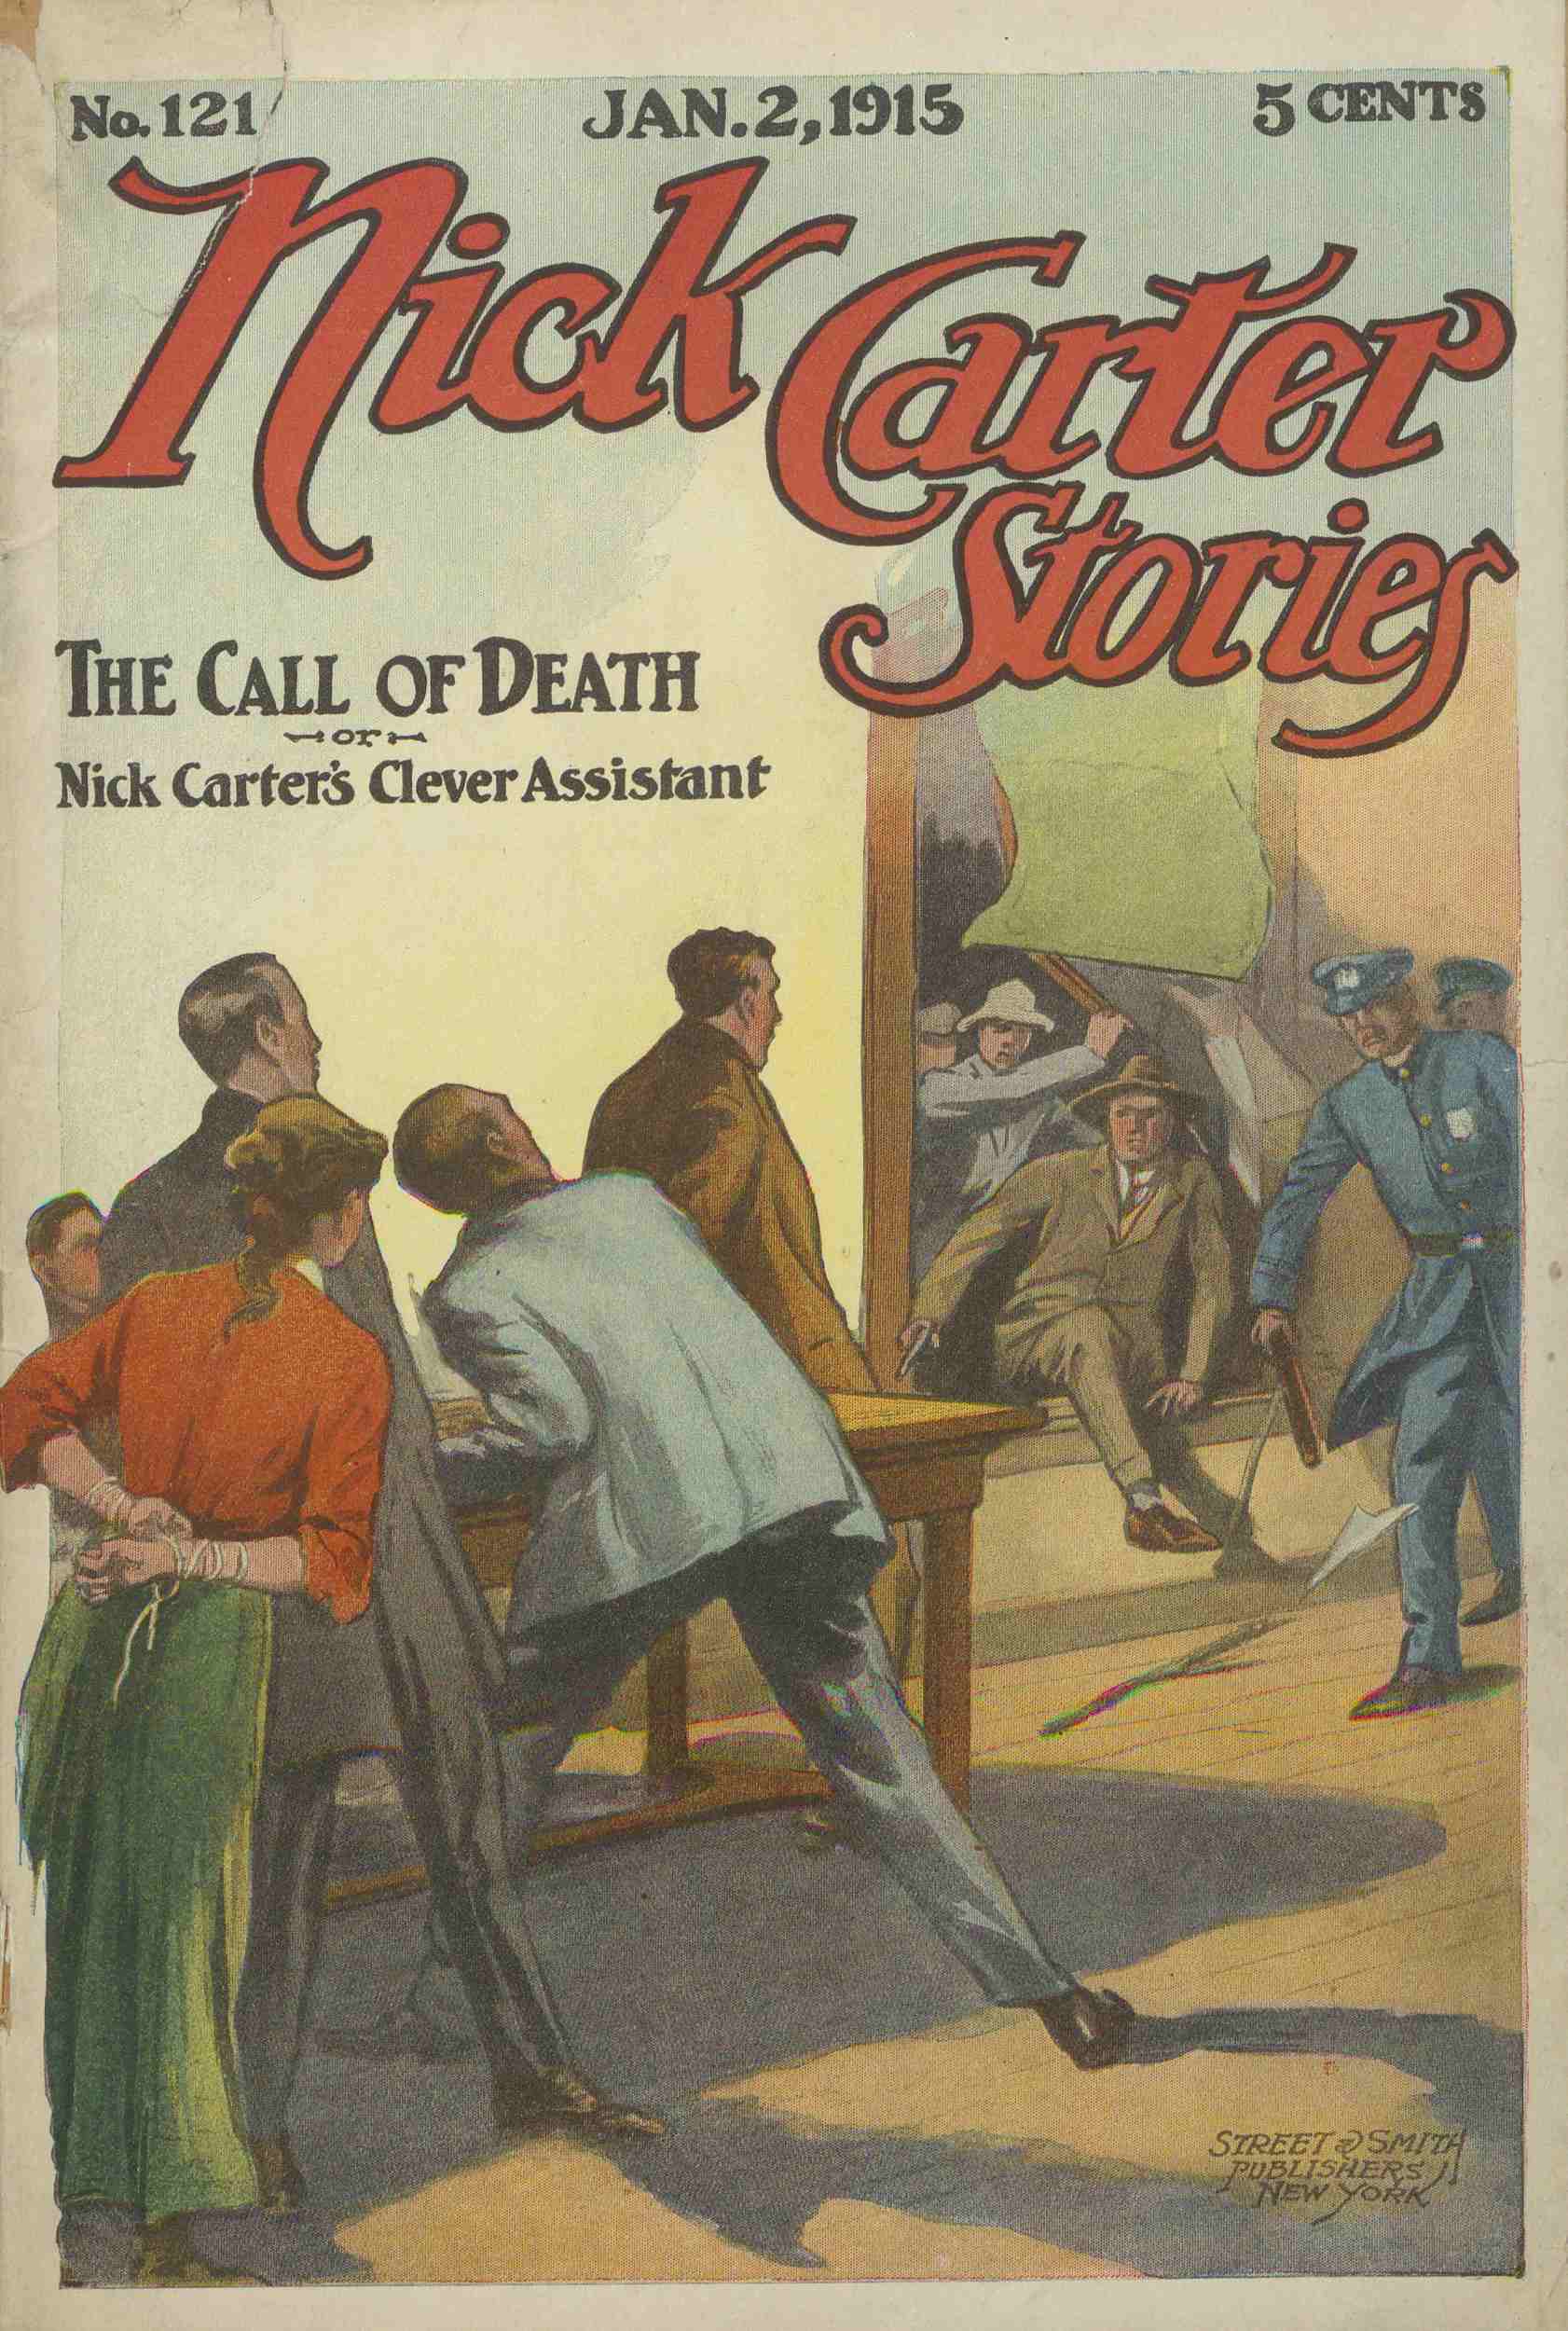 The Project Gutenberg eBook of The call of death, by Nick Carter.